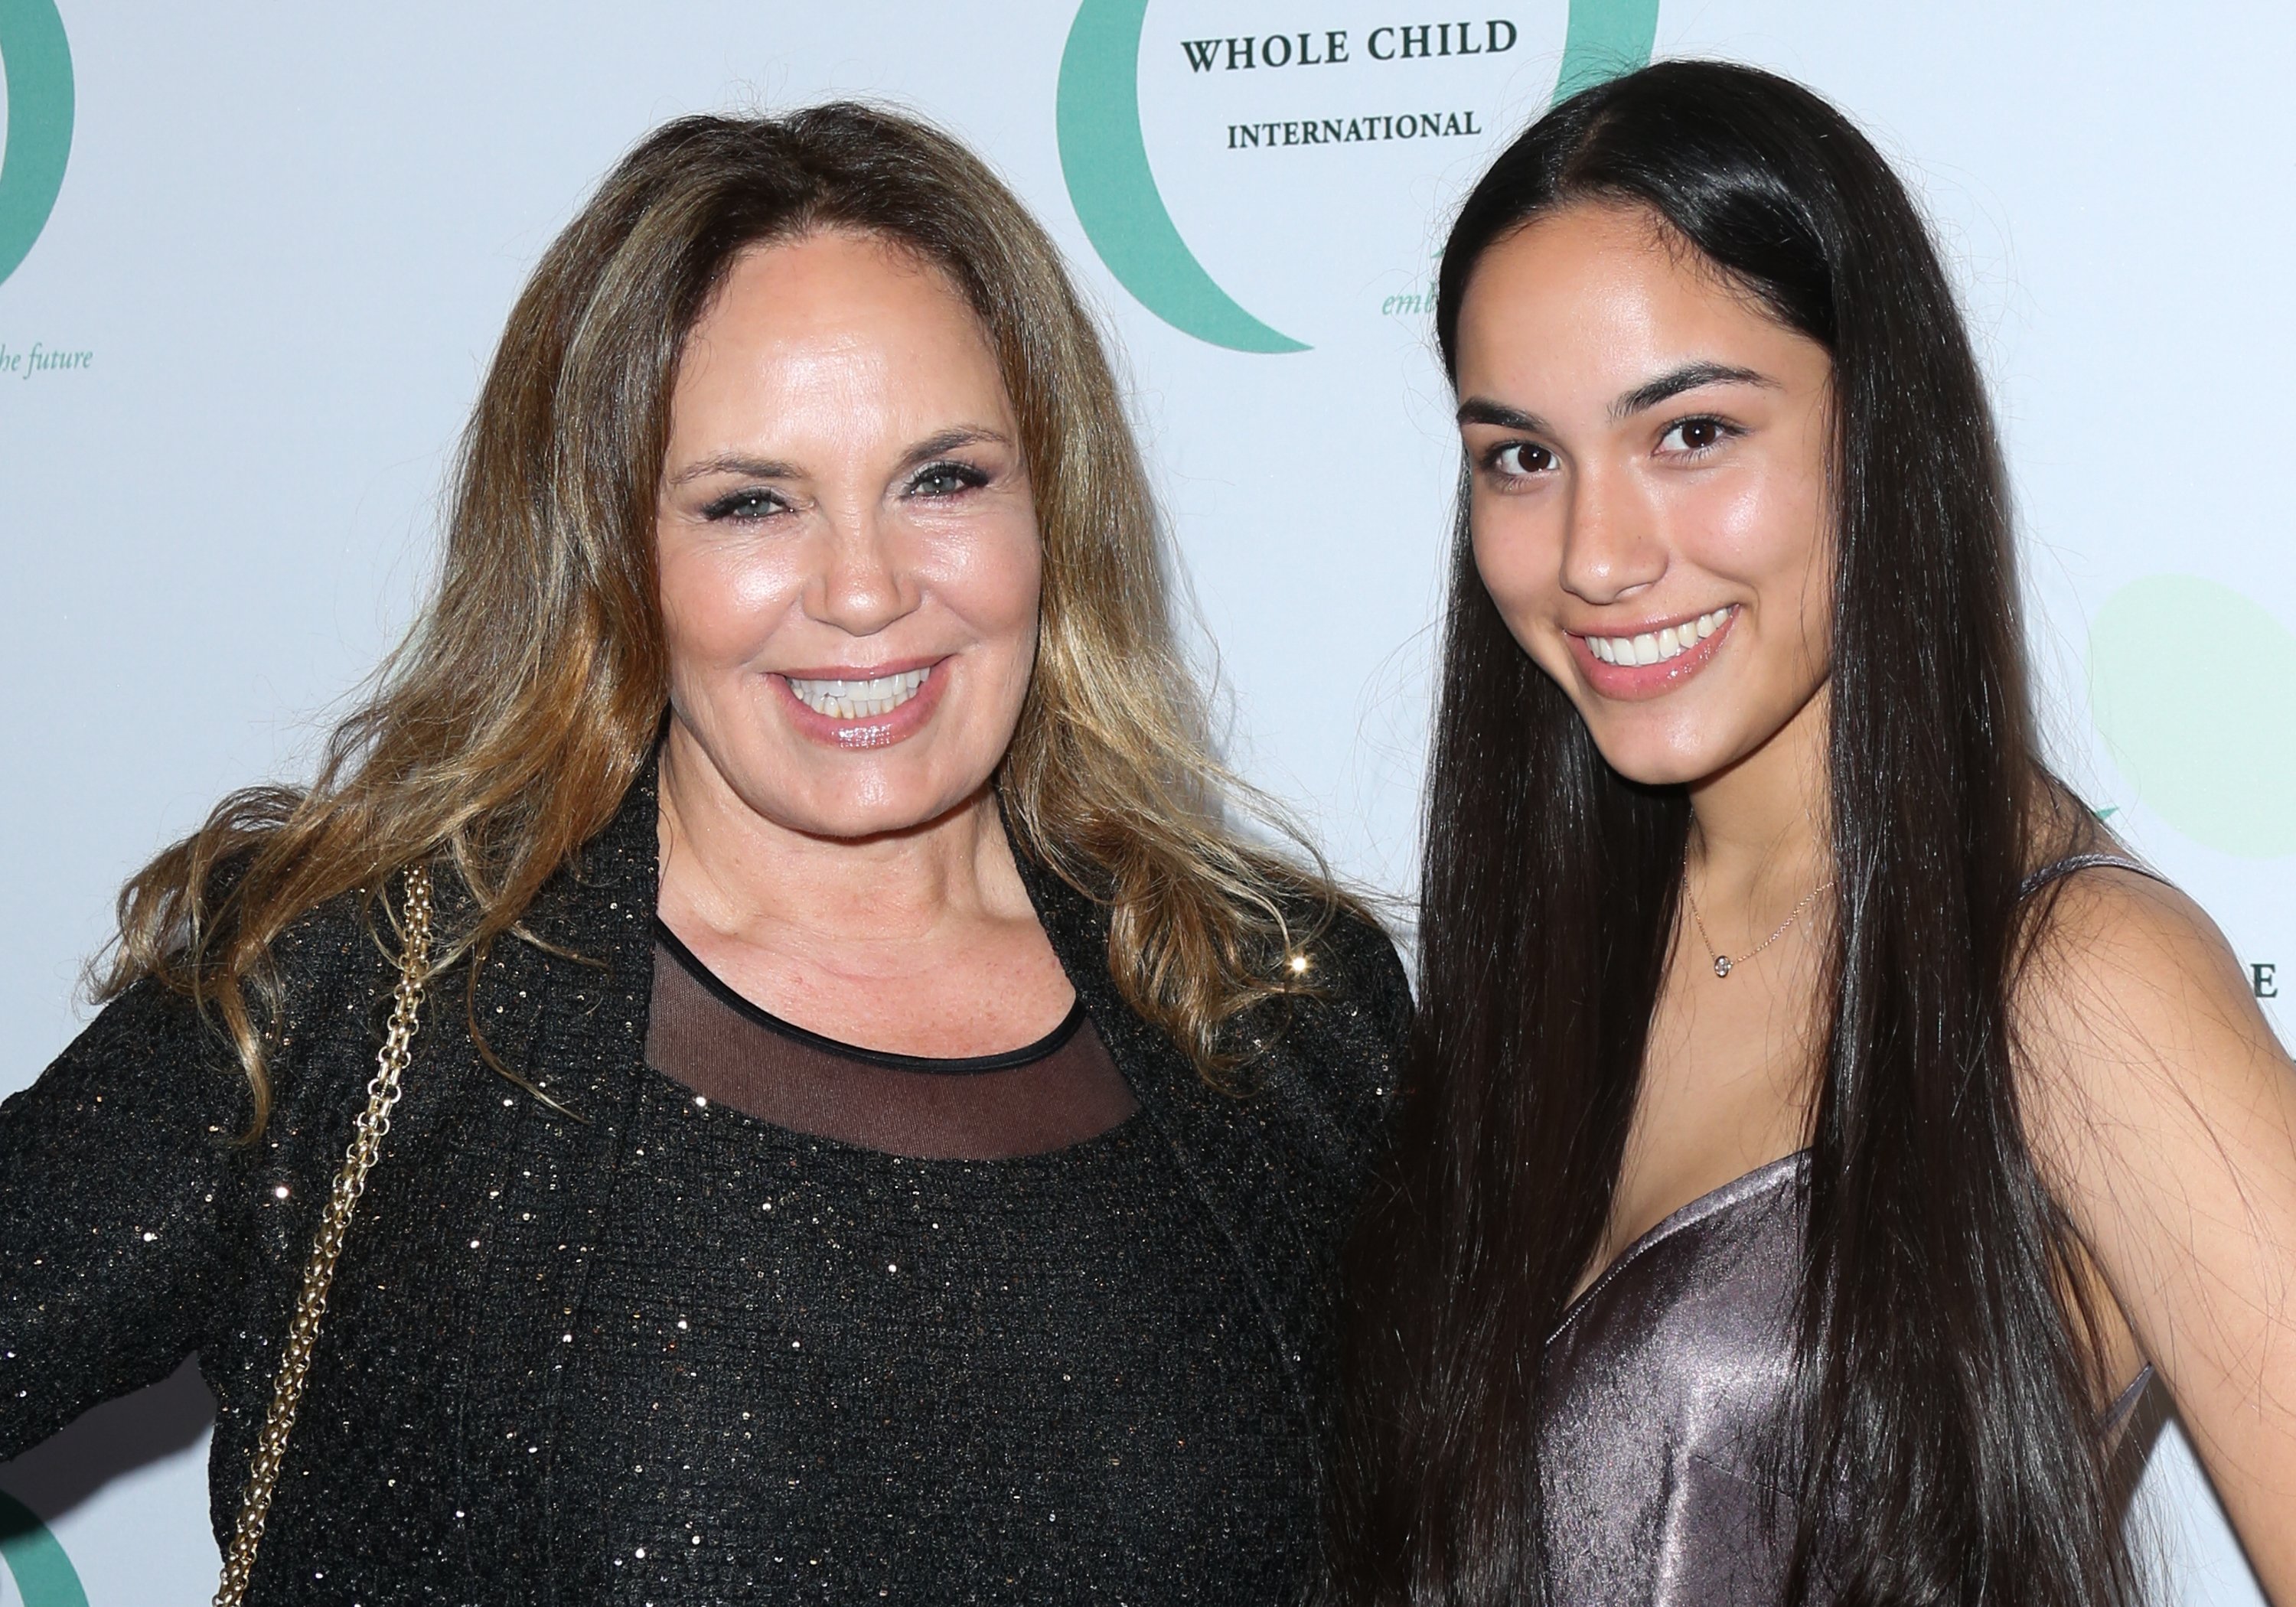 Catherine Bach and Laura Esmeralda Lopez at the Whole Child International's inaugural gala on October 26, 2017, in Beverly Hills, California | Source: Getty Images